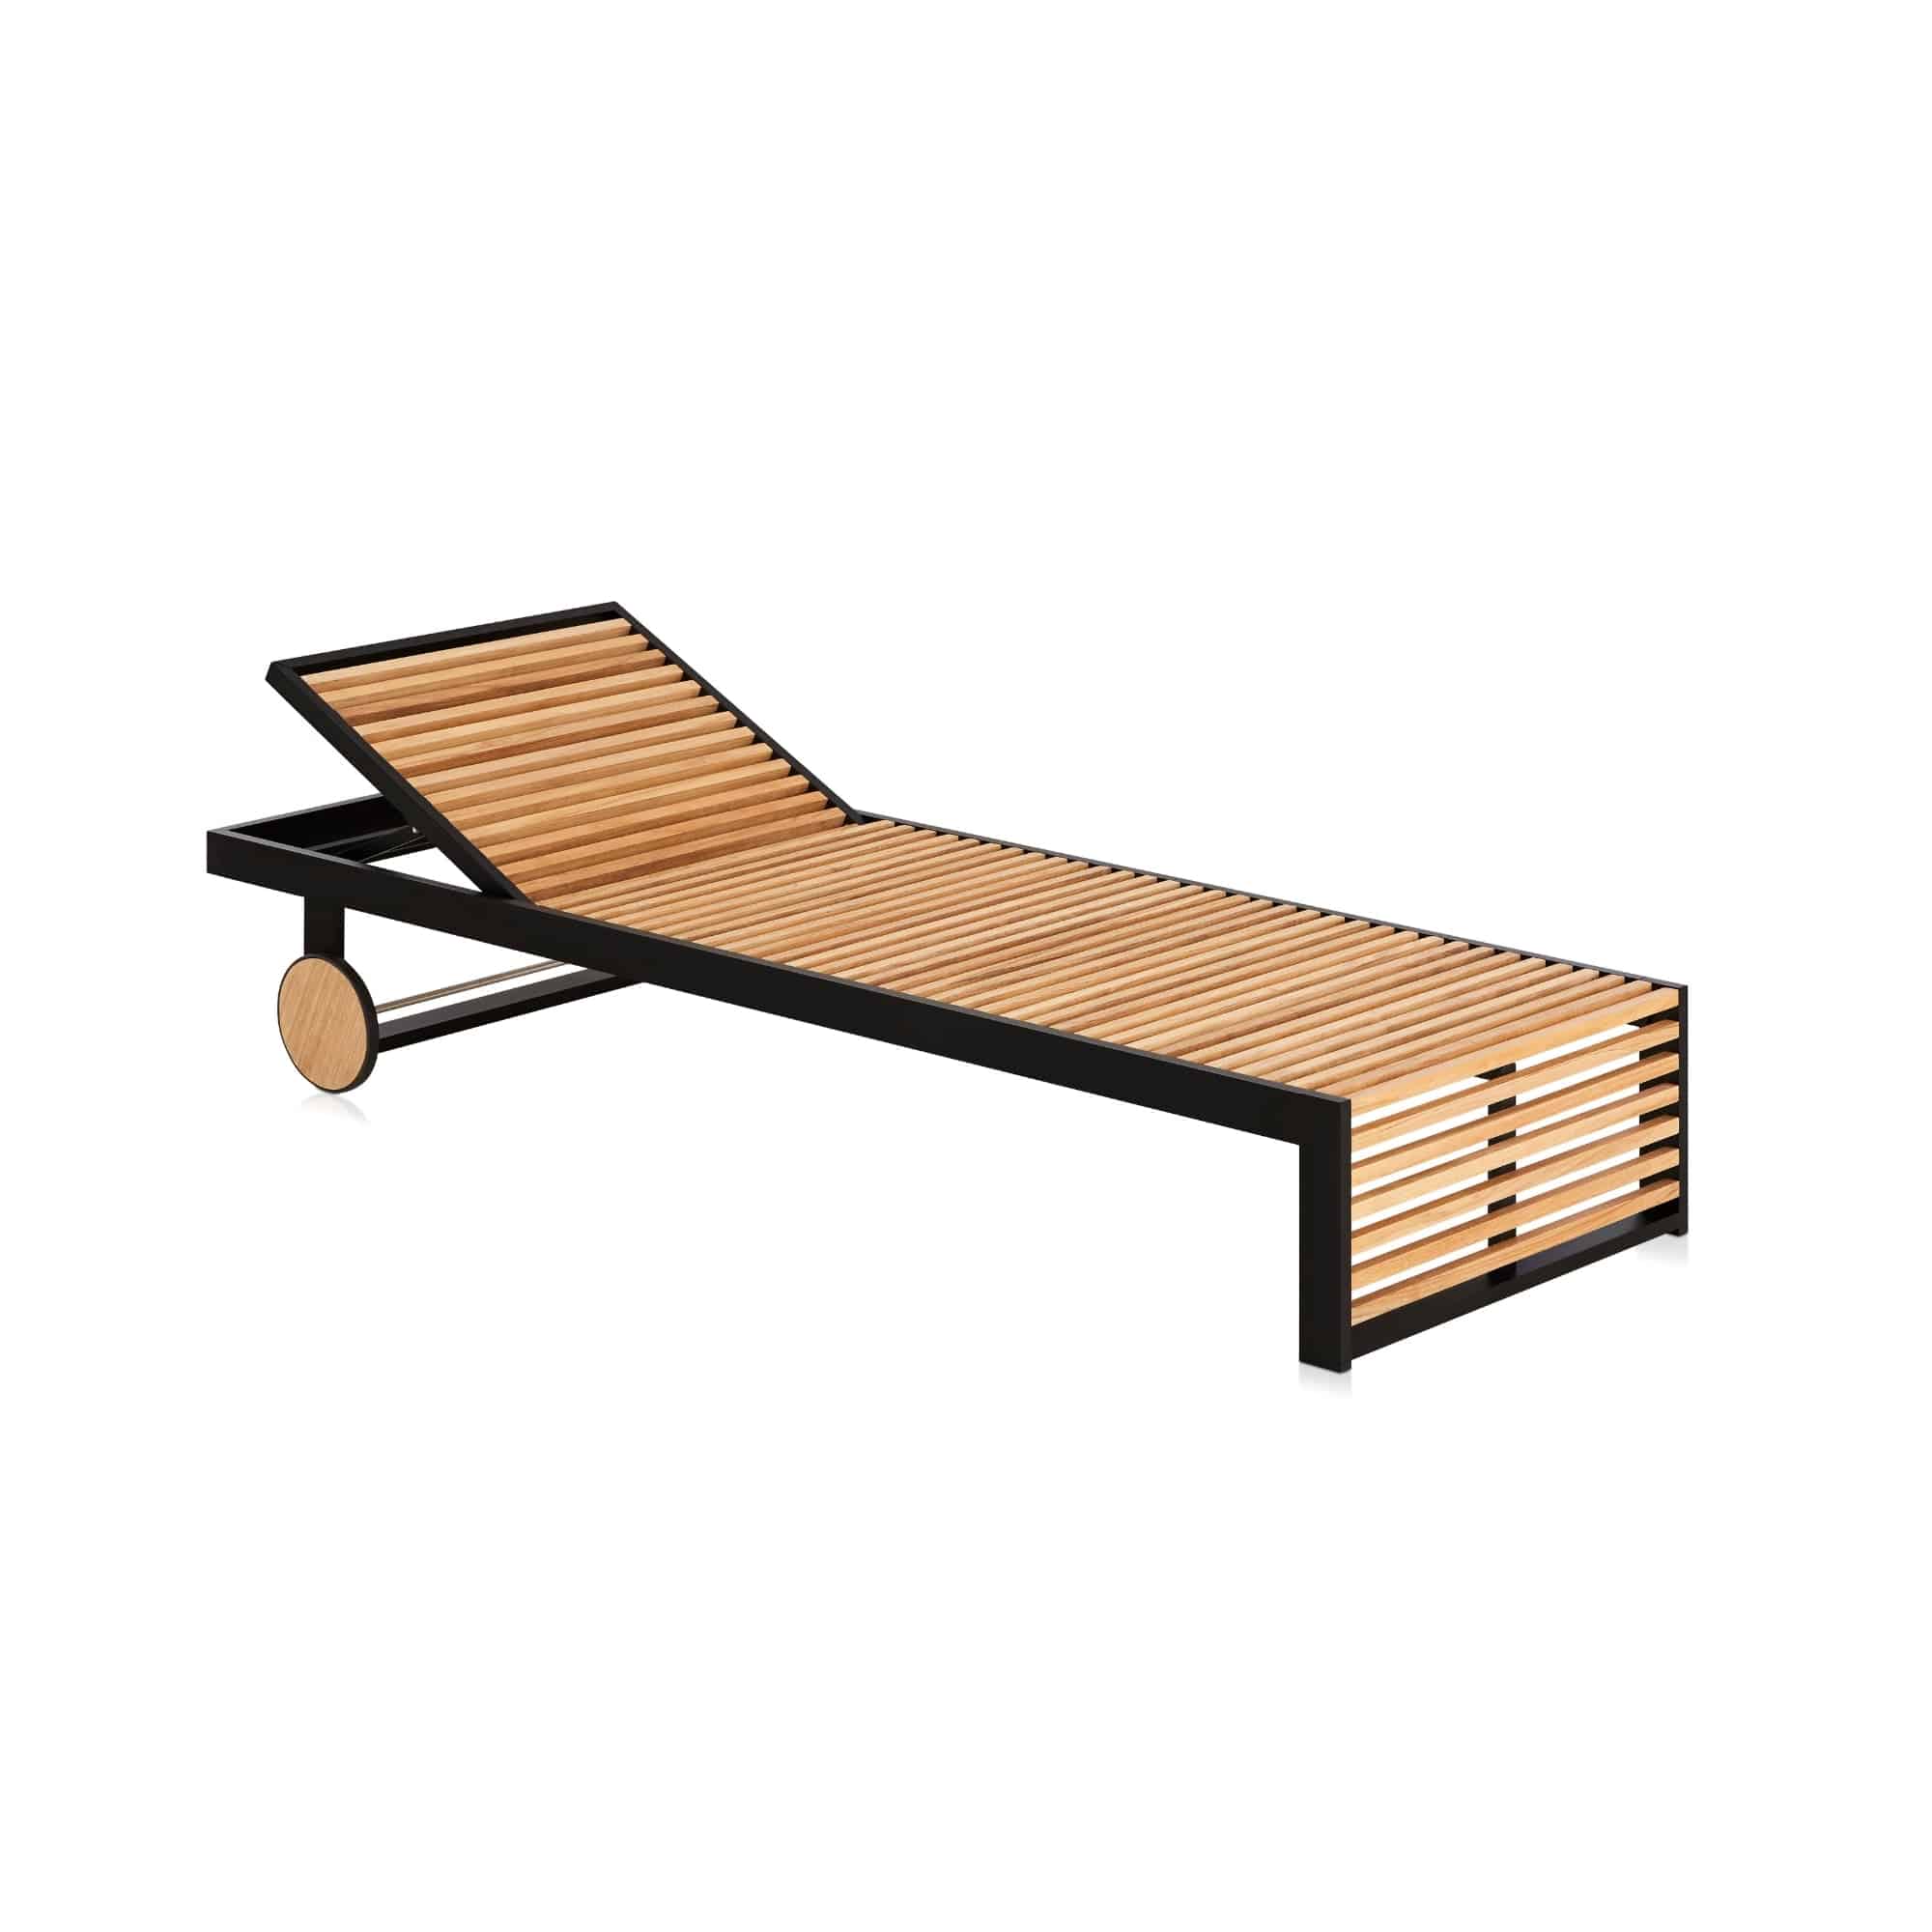 DNA Teak Chaise Lounge - THAT COOL LIVING